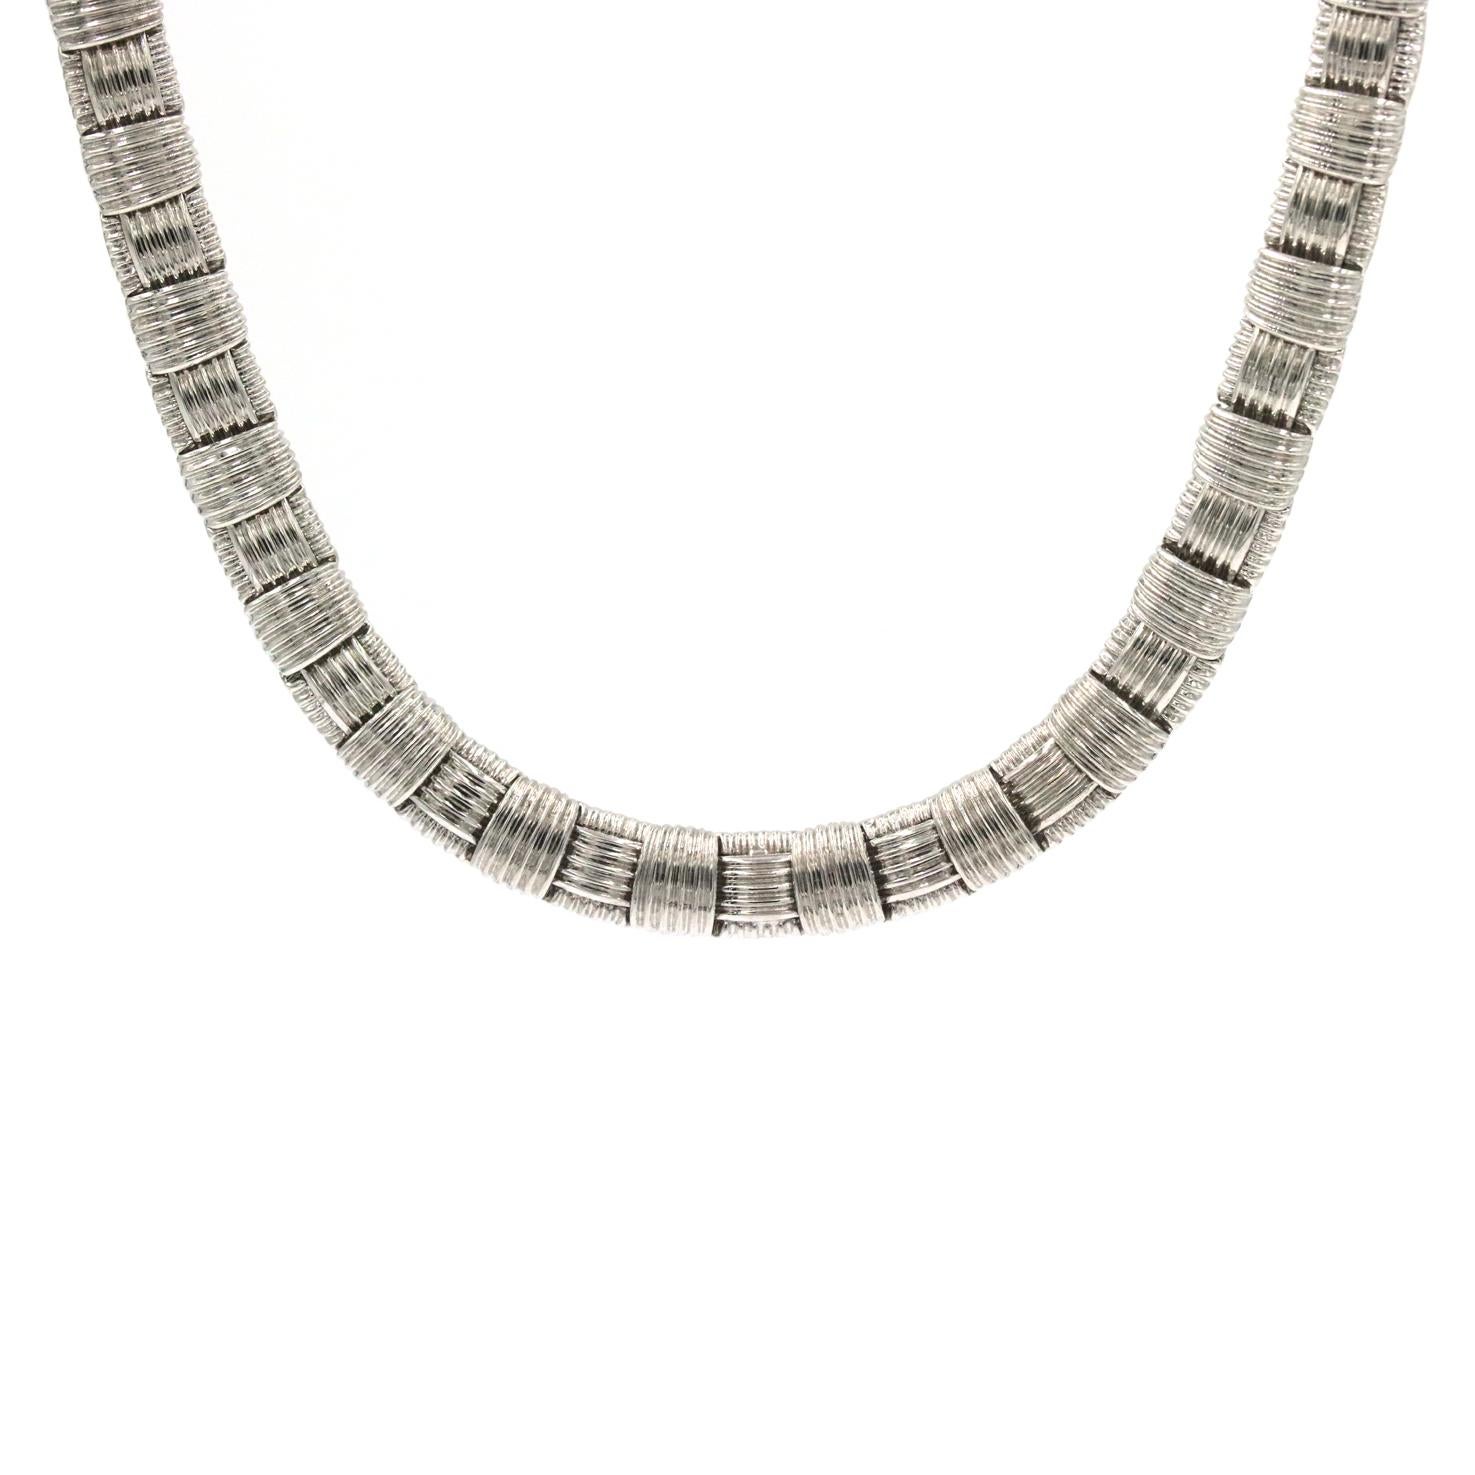 Roberto Coin Appasionata Necklace With A Diamond Accent Clasp In 18K White Gold.